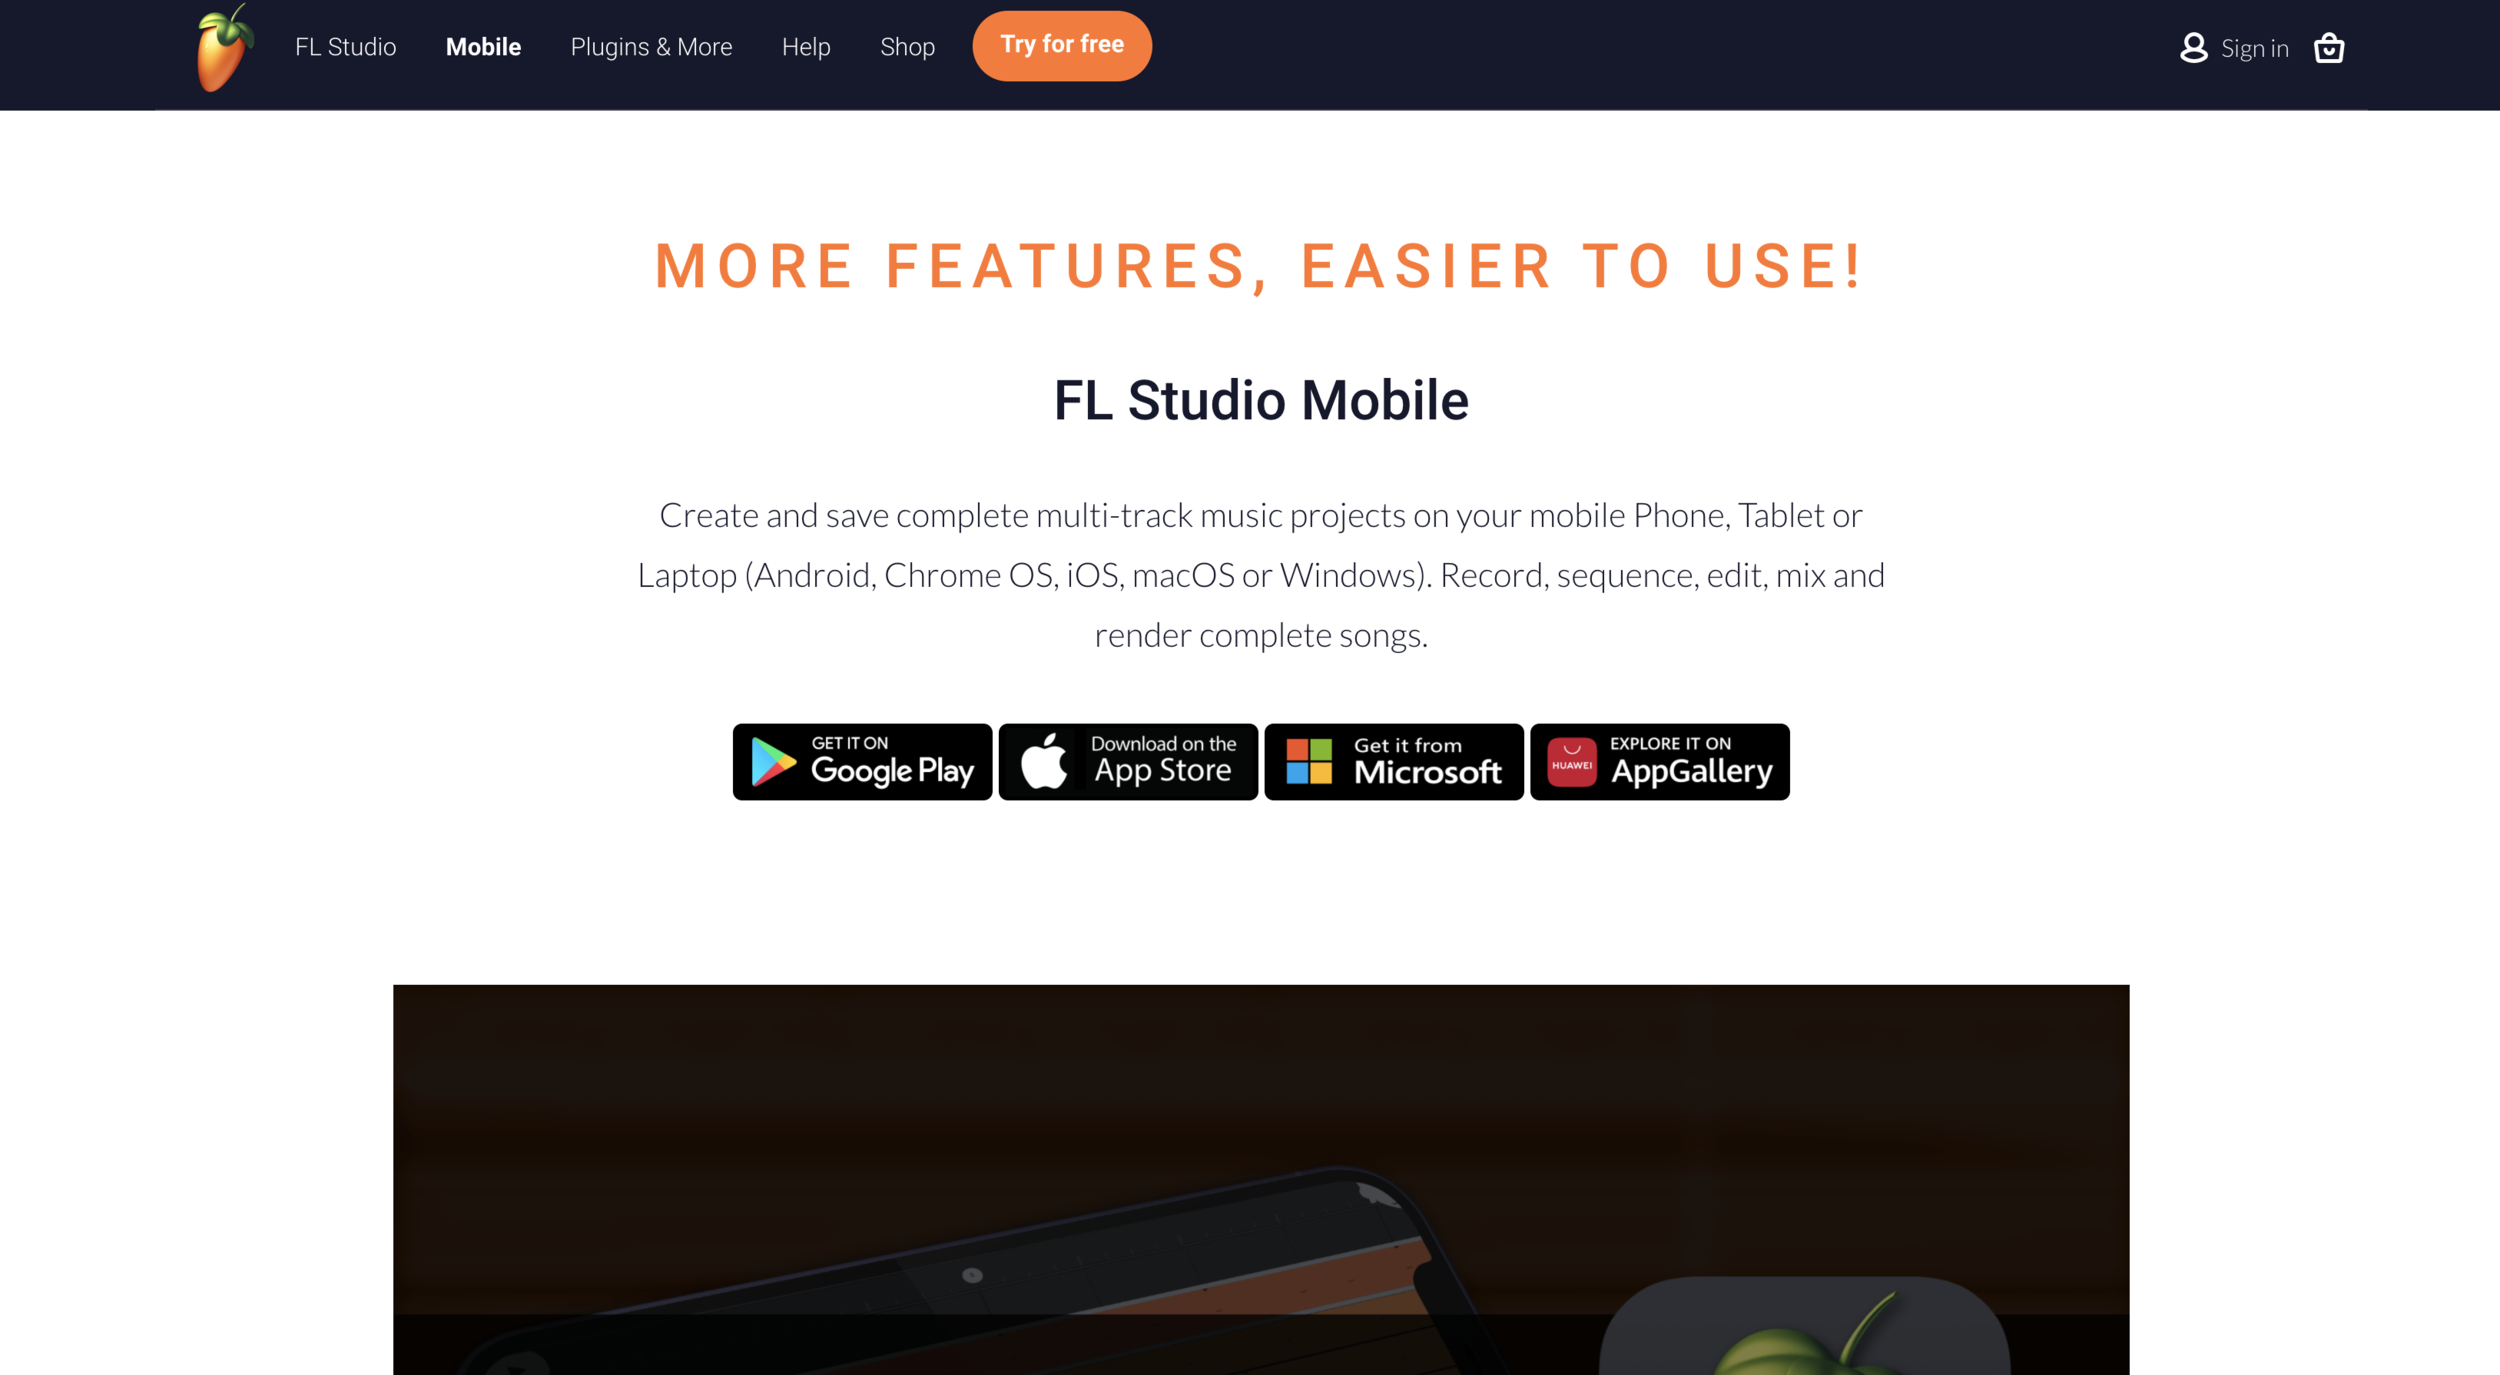 FL STUDIO MOBILE  Android and iOS 